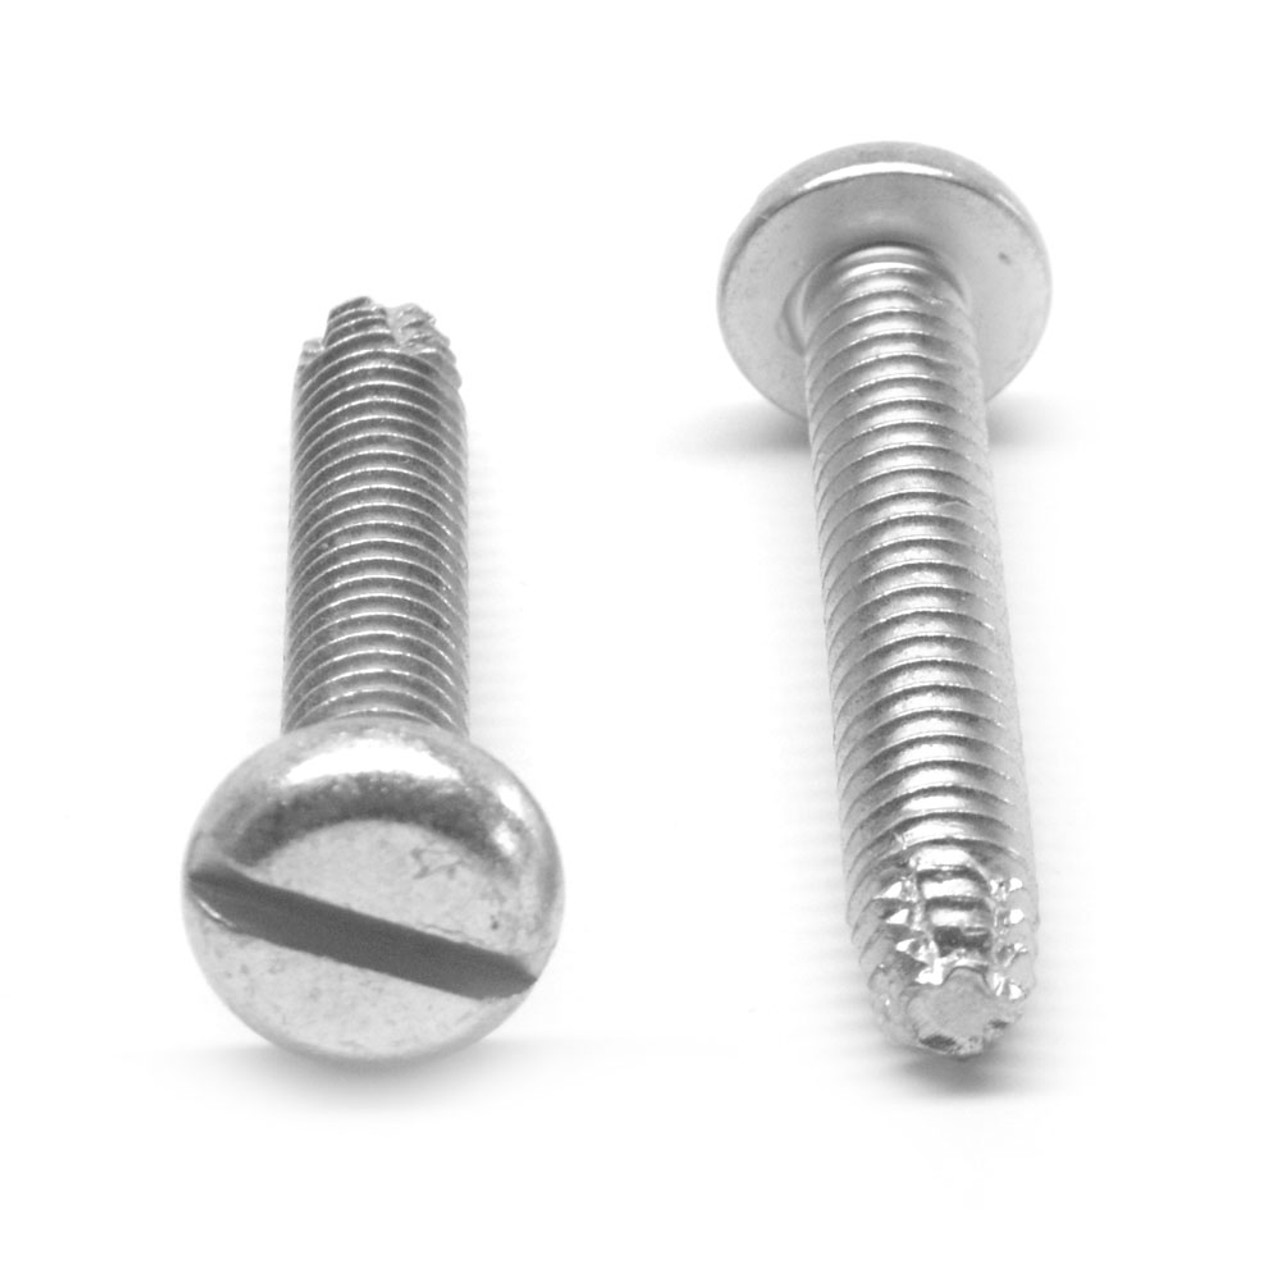 #4-40 x 5/16" (FT) Coarse Thread Thread Cutting Screw Slotted Pan Head Type F Low Carbon Steel Zinc Plated